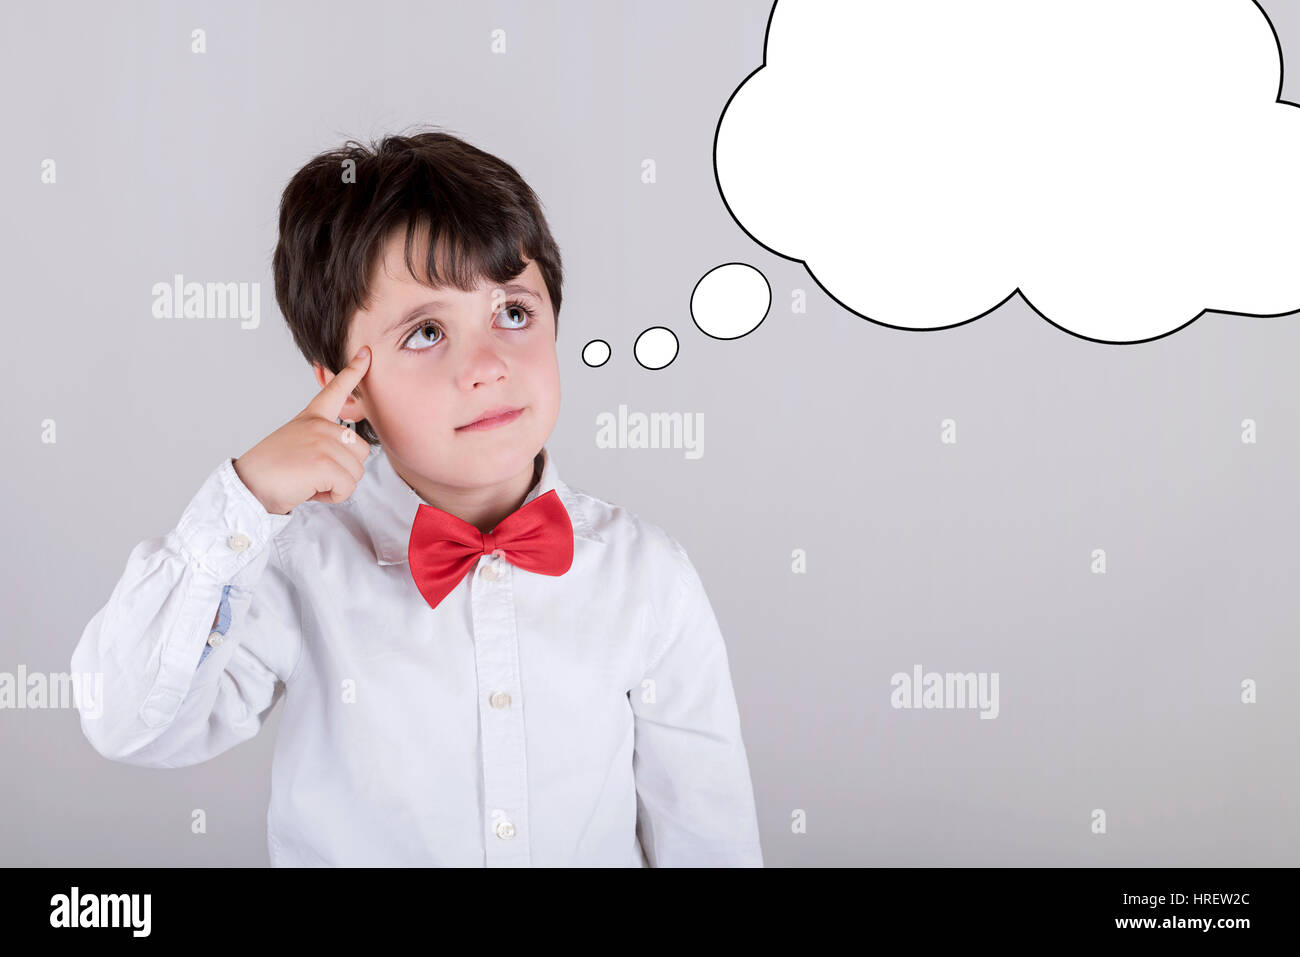 Thoughtful young boy with an empty thought bubble Stock Photo